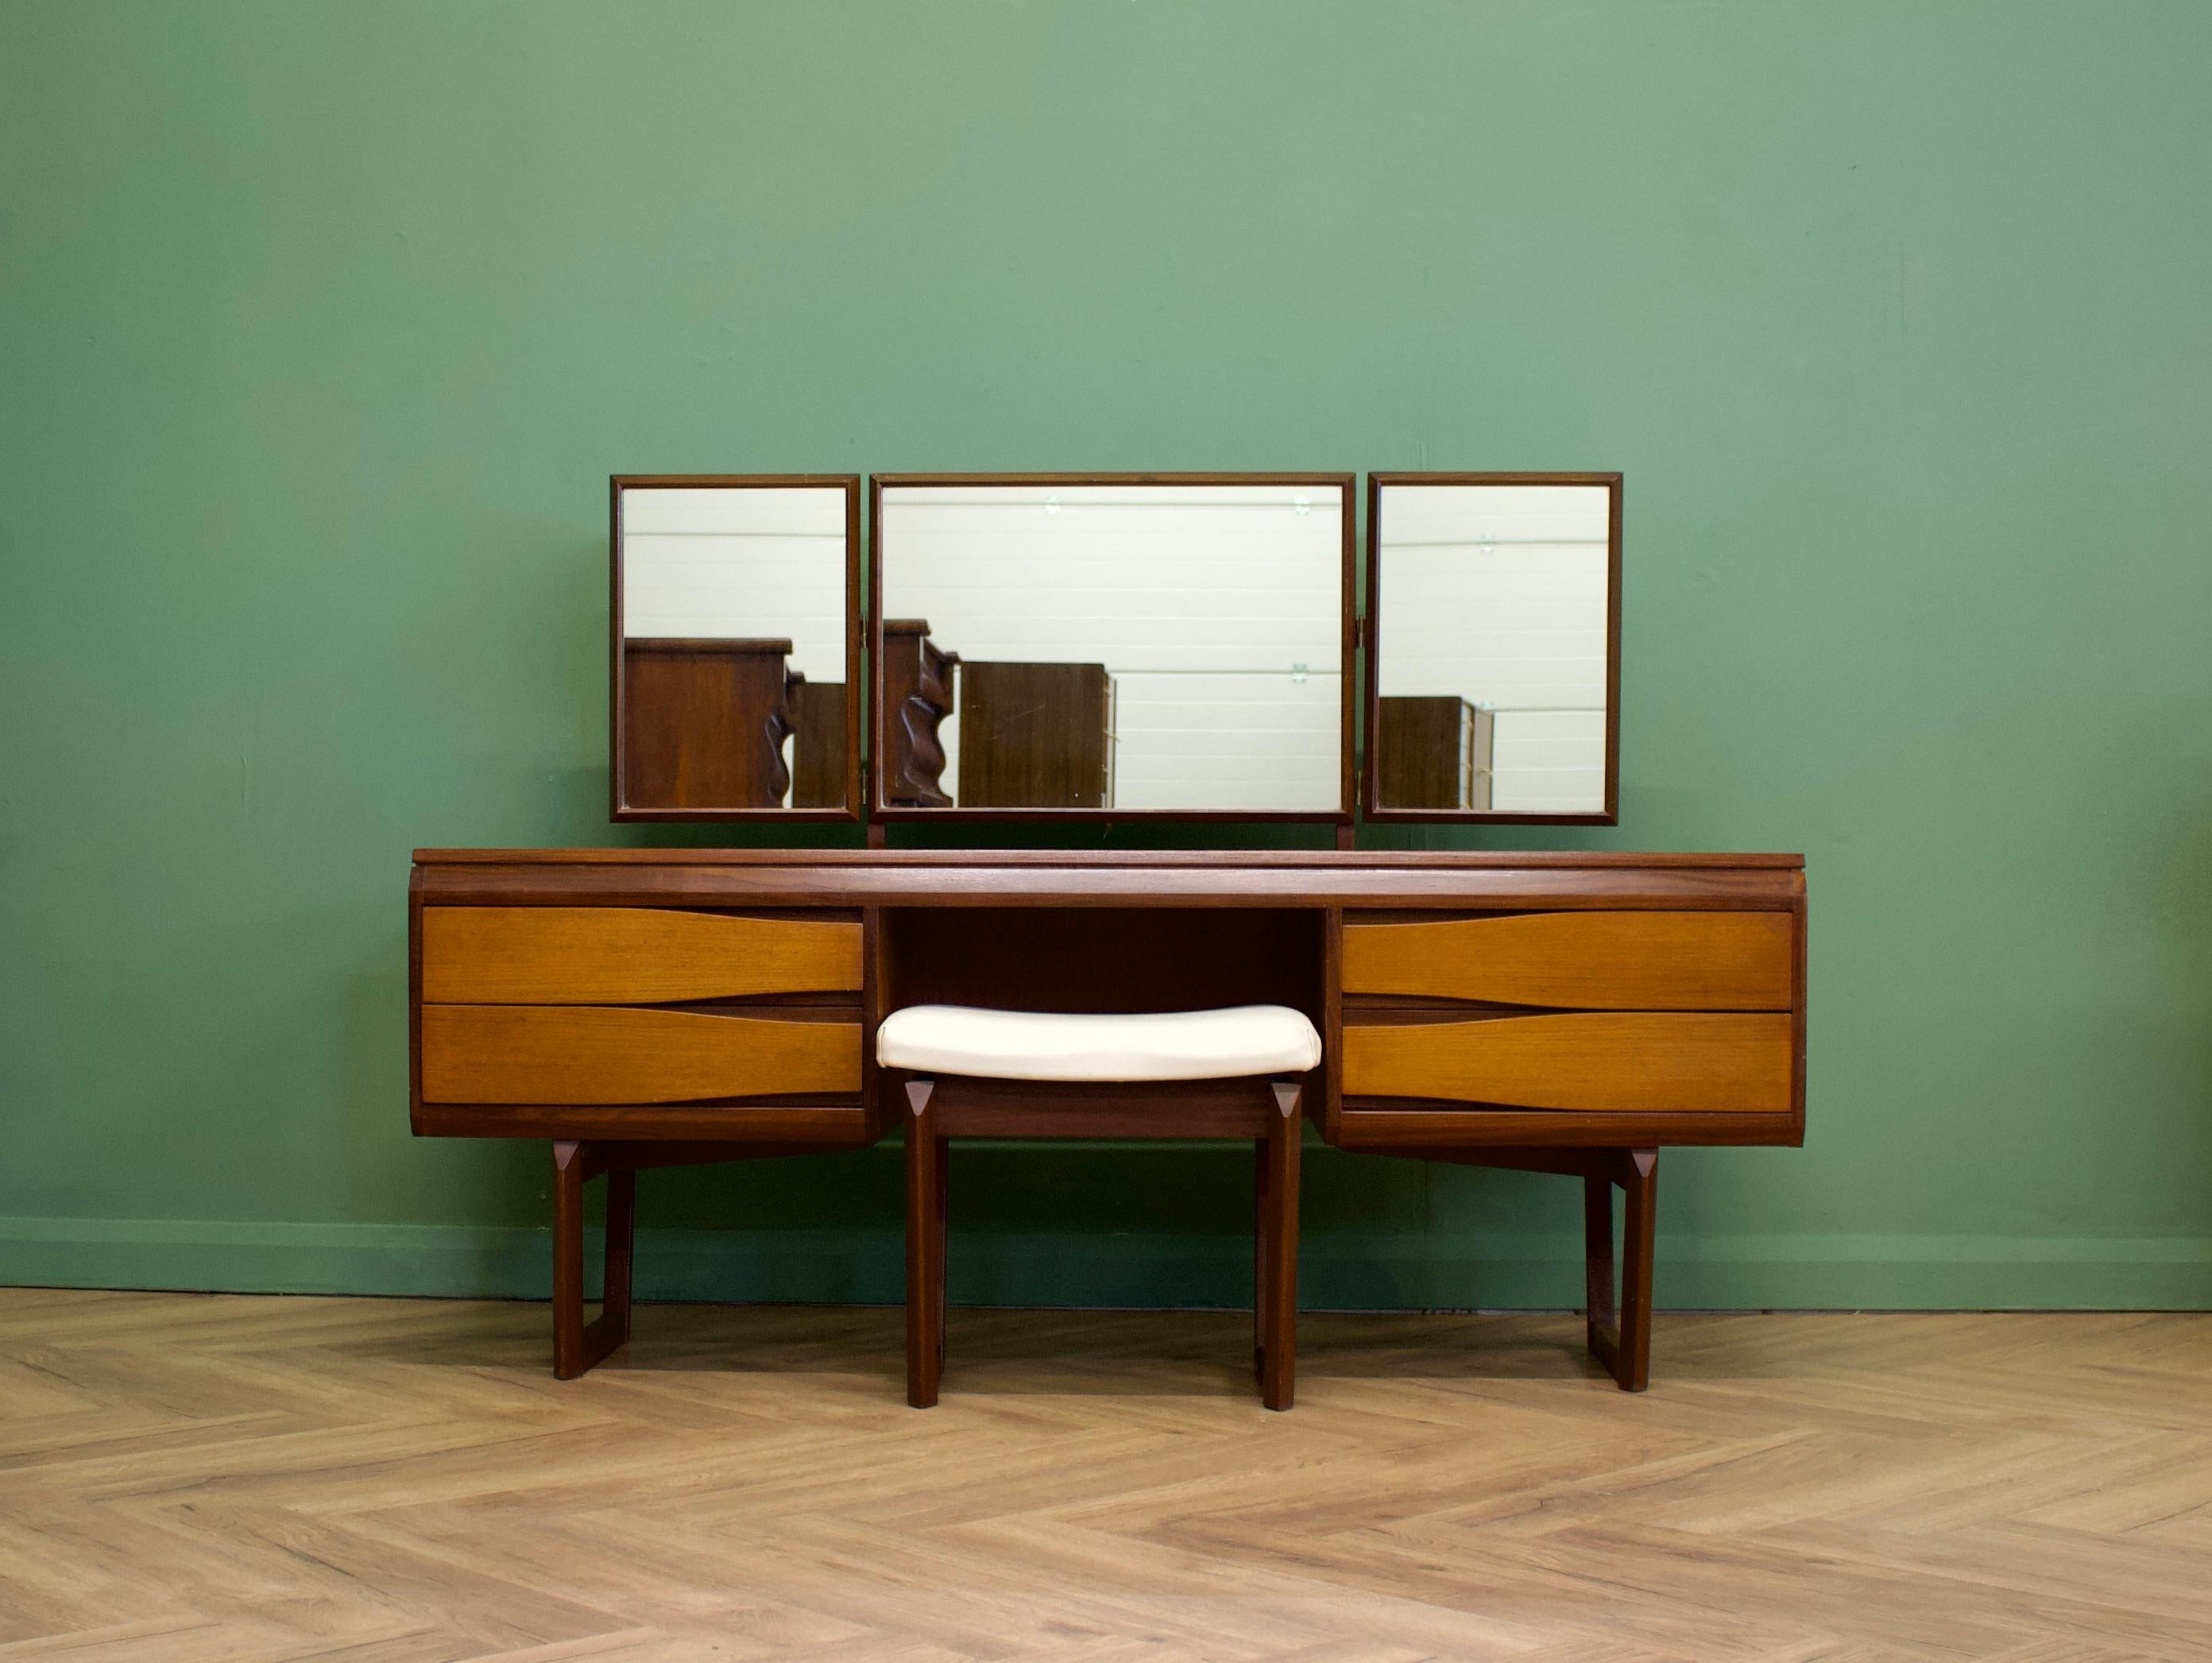 - Mid century dressing table & stool
- Manufactured in UK by White & Newton
- With triptych mirror and four drawers
- Made from teak and teak veneers
- Height to top of mirror is 113cm.